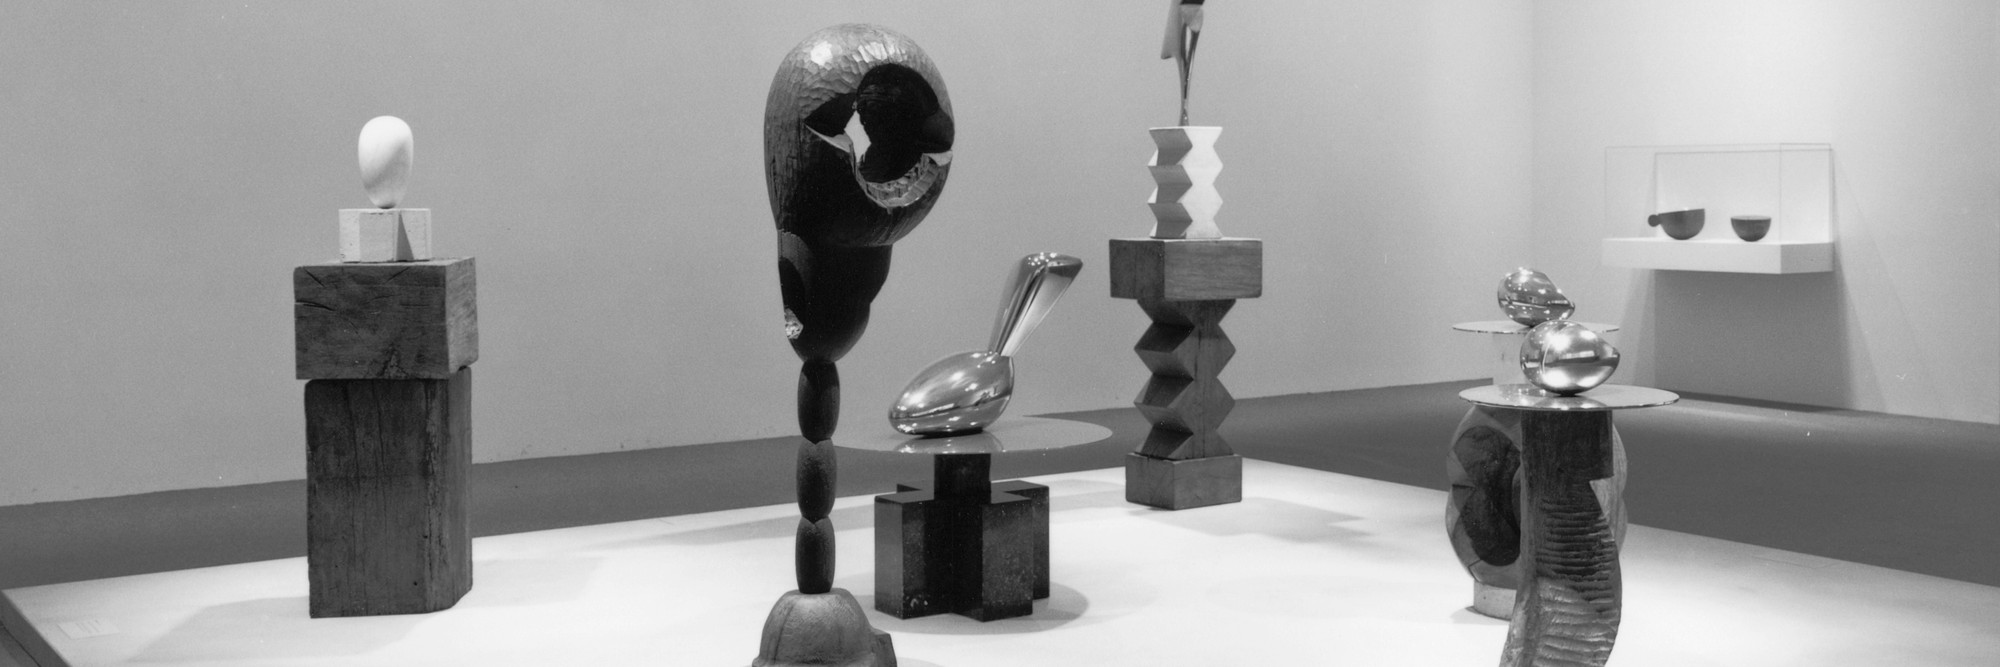 Installation view of Brâncuși: Selected Masterworks from the Musée National d’Art Moderne and The Museum of Modern Art, New York at The Museum of Modern Art, New York. Photo: Katherine Keller